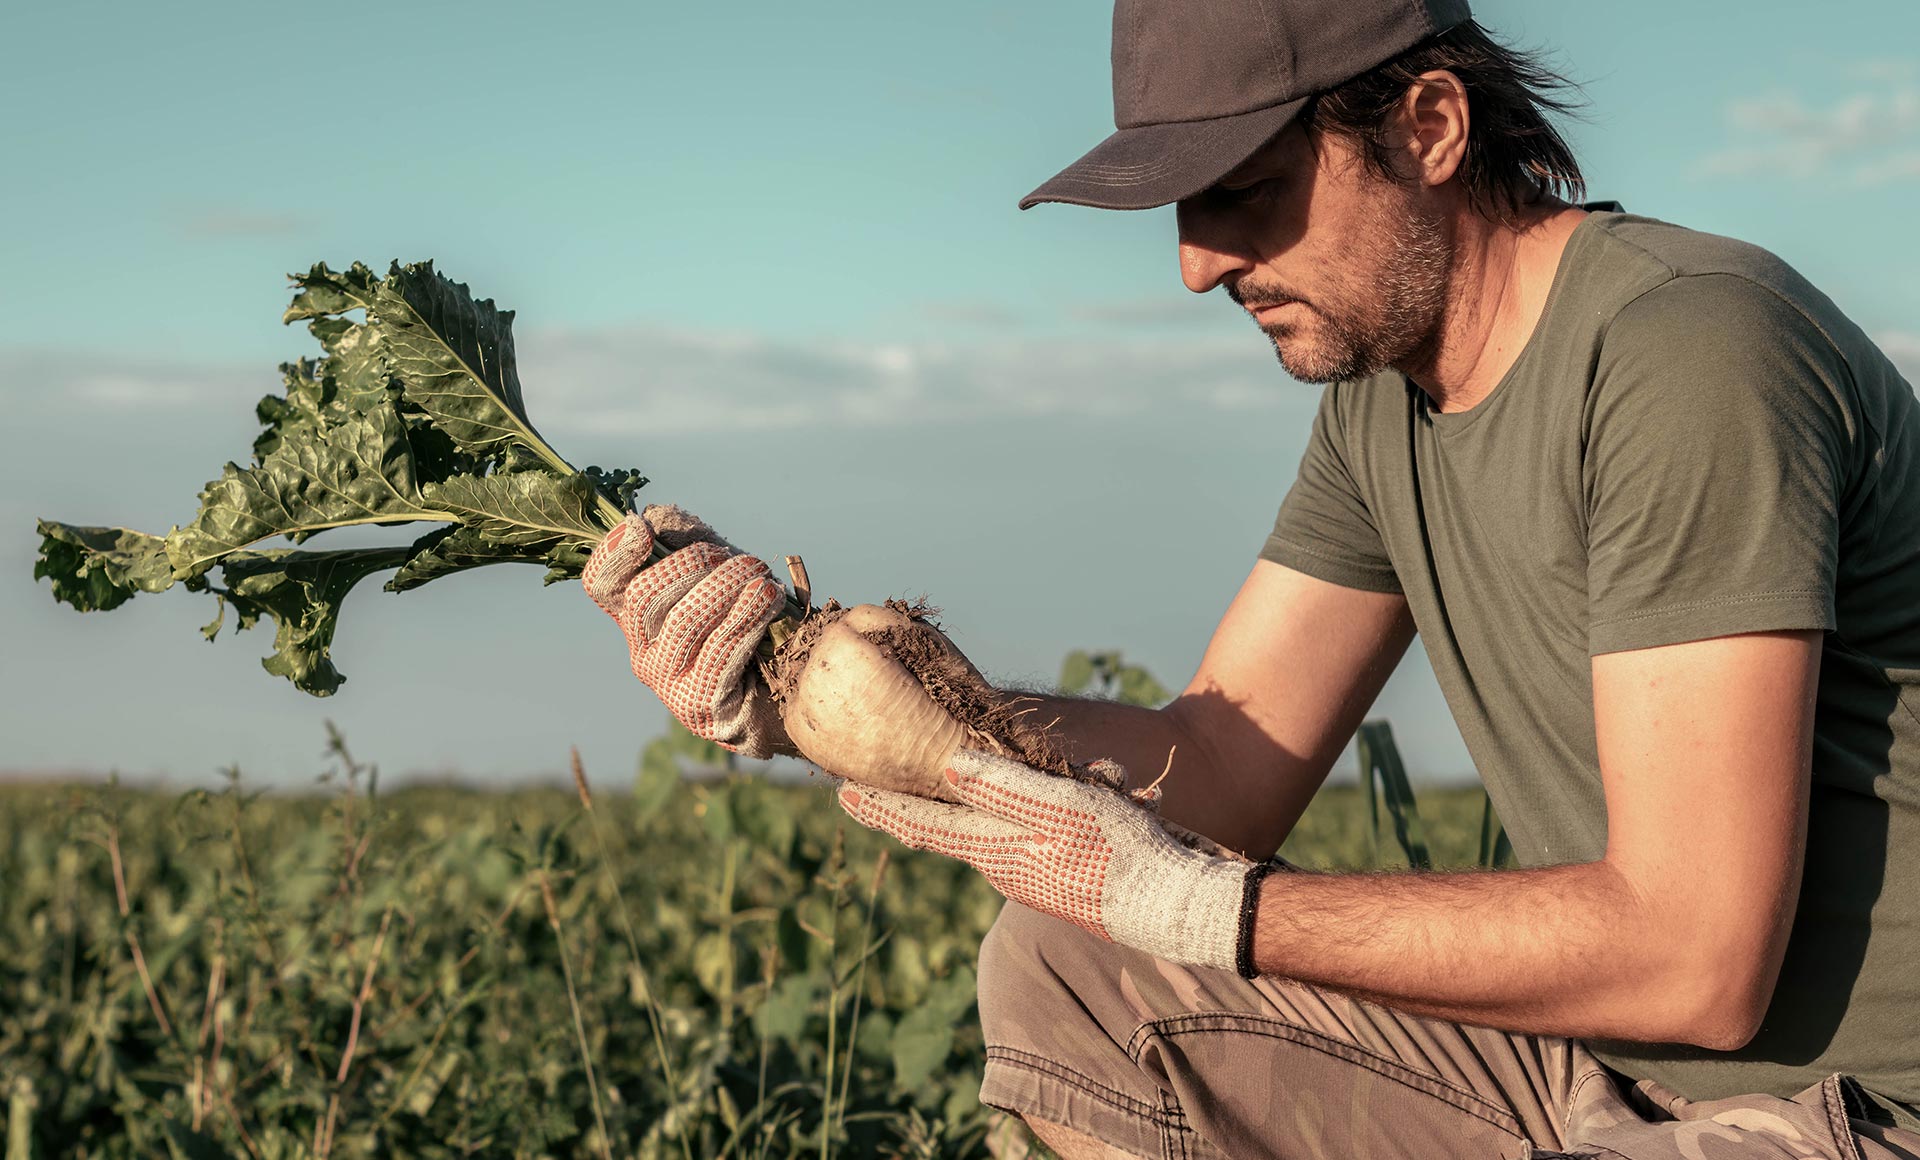 British Sugar and Tropic announce strategic collaboration to sustainably tackle devastating disease of sugar beet